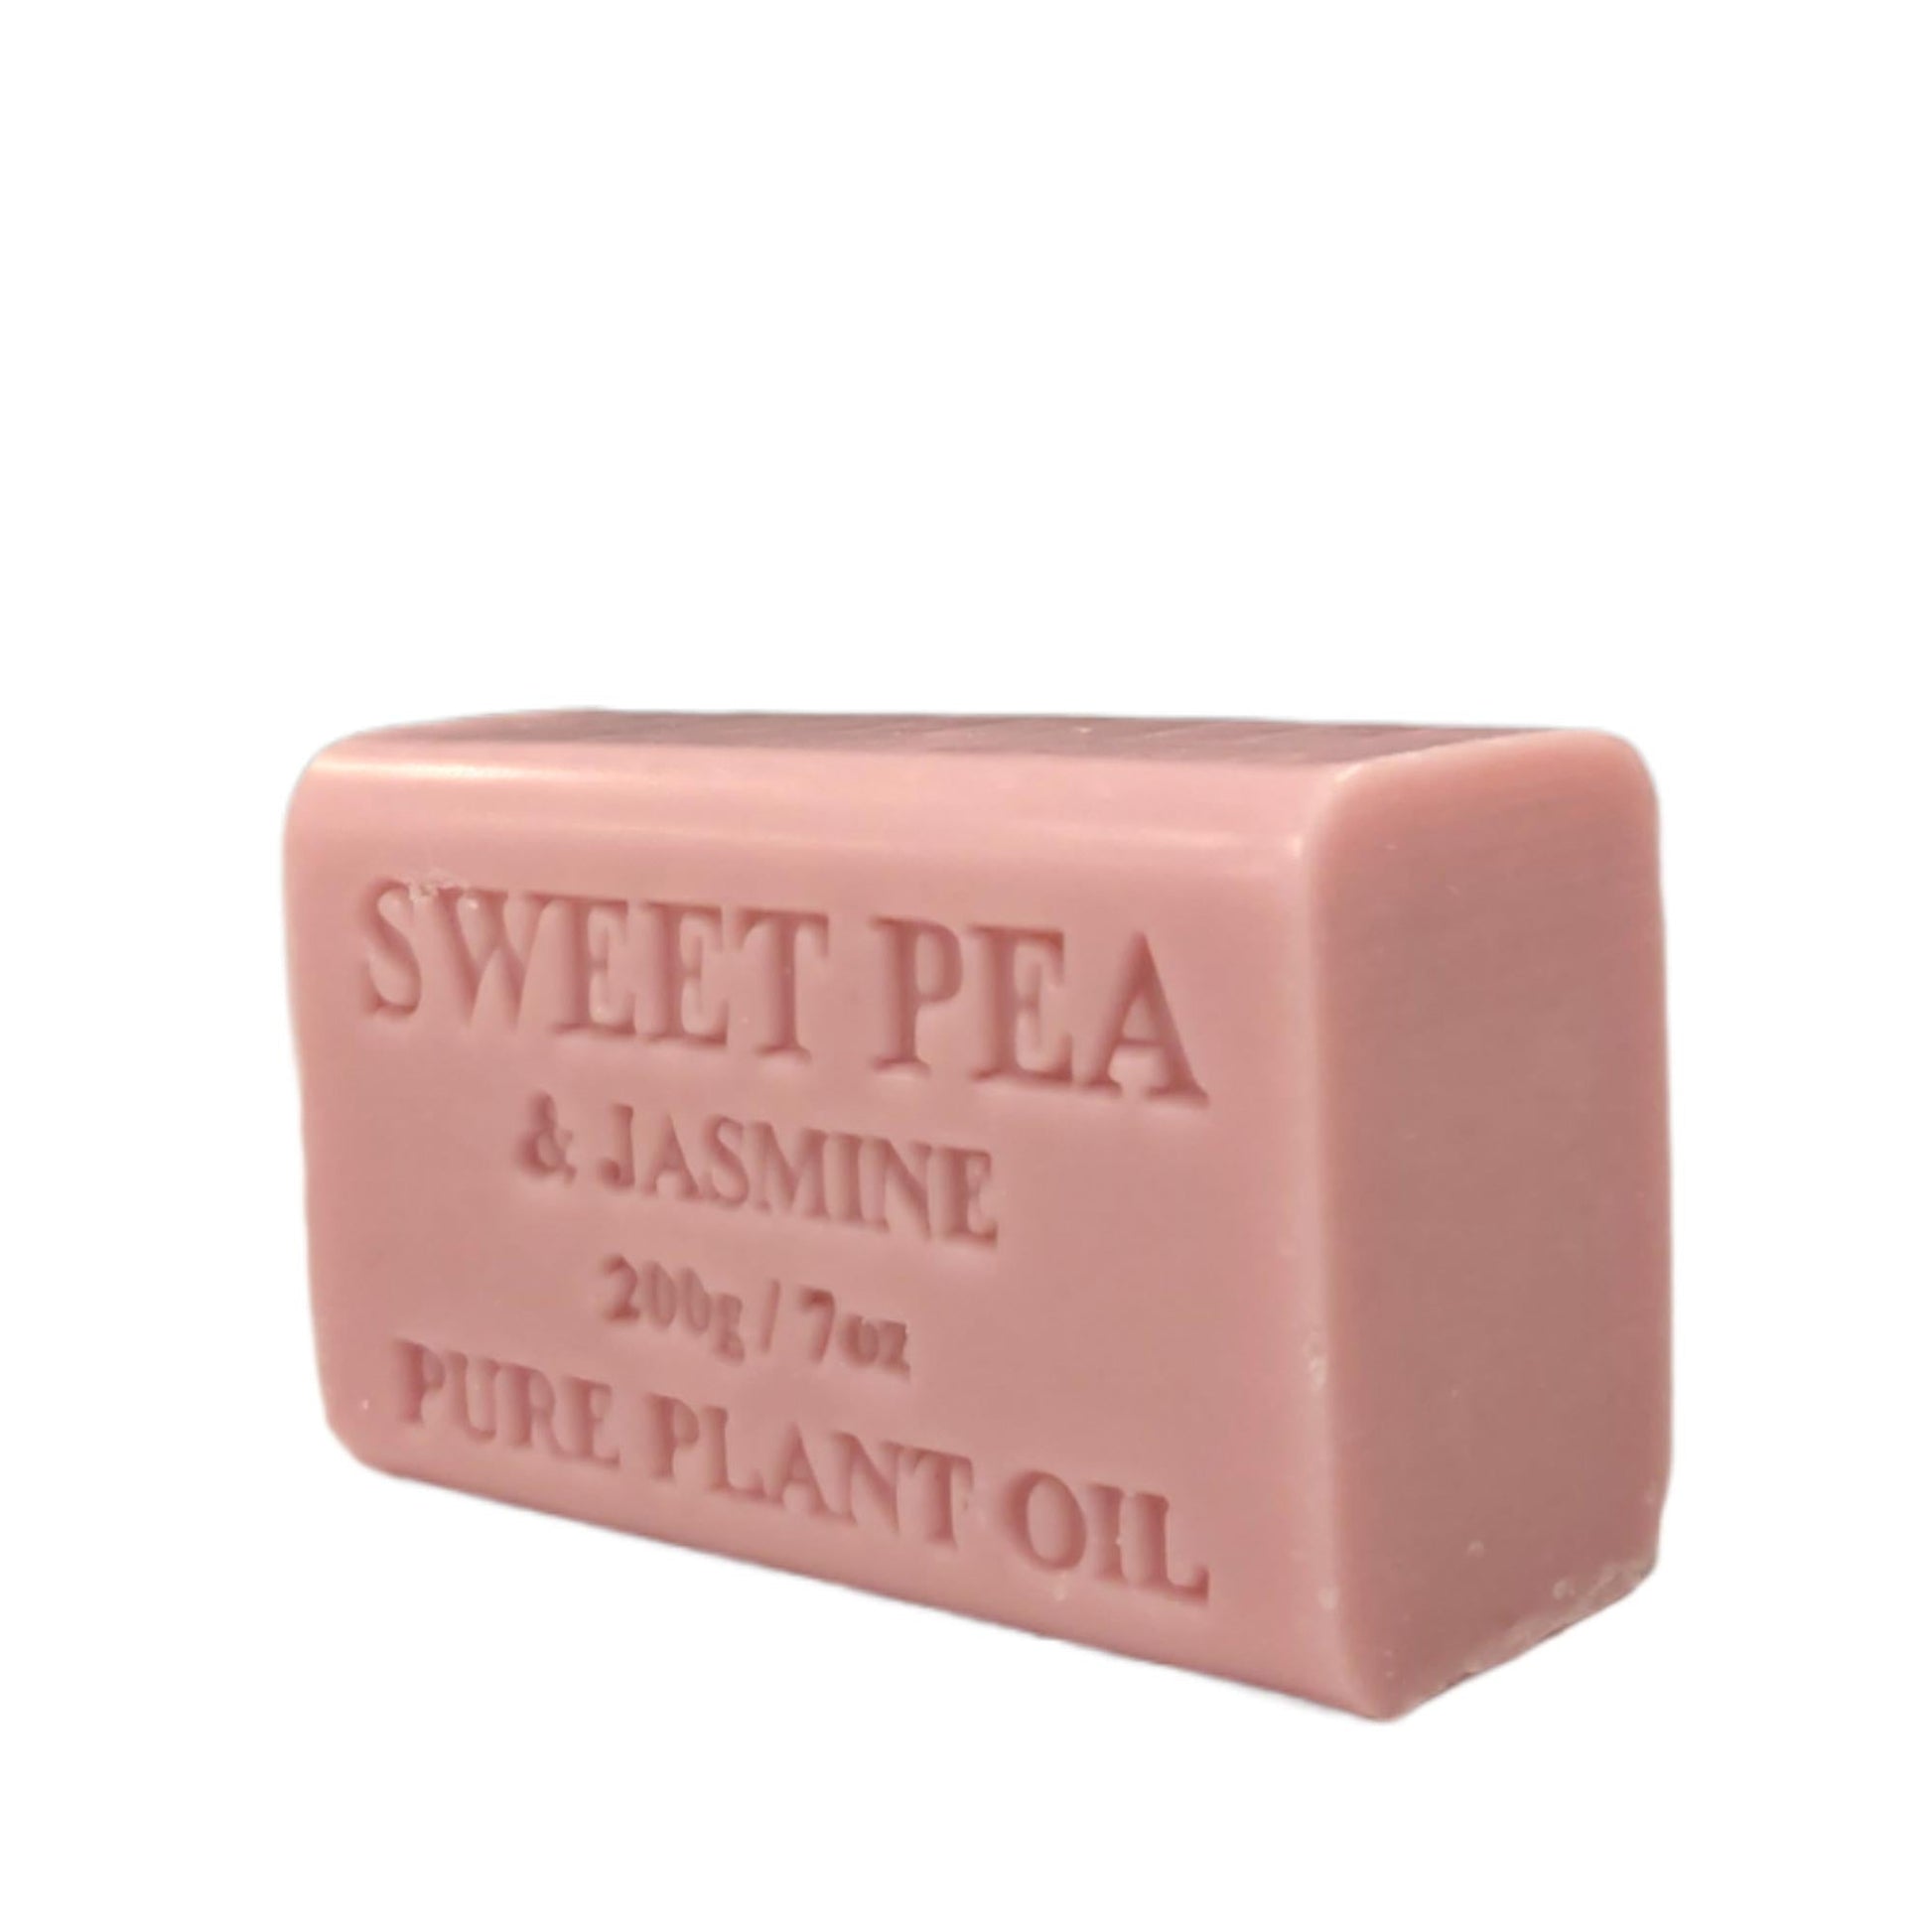 65x 200g Plant Oil Soap Sweet Pea Jasmine Scent Pure Natural Vegetable Base Bar